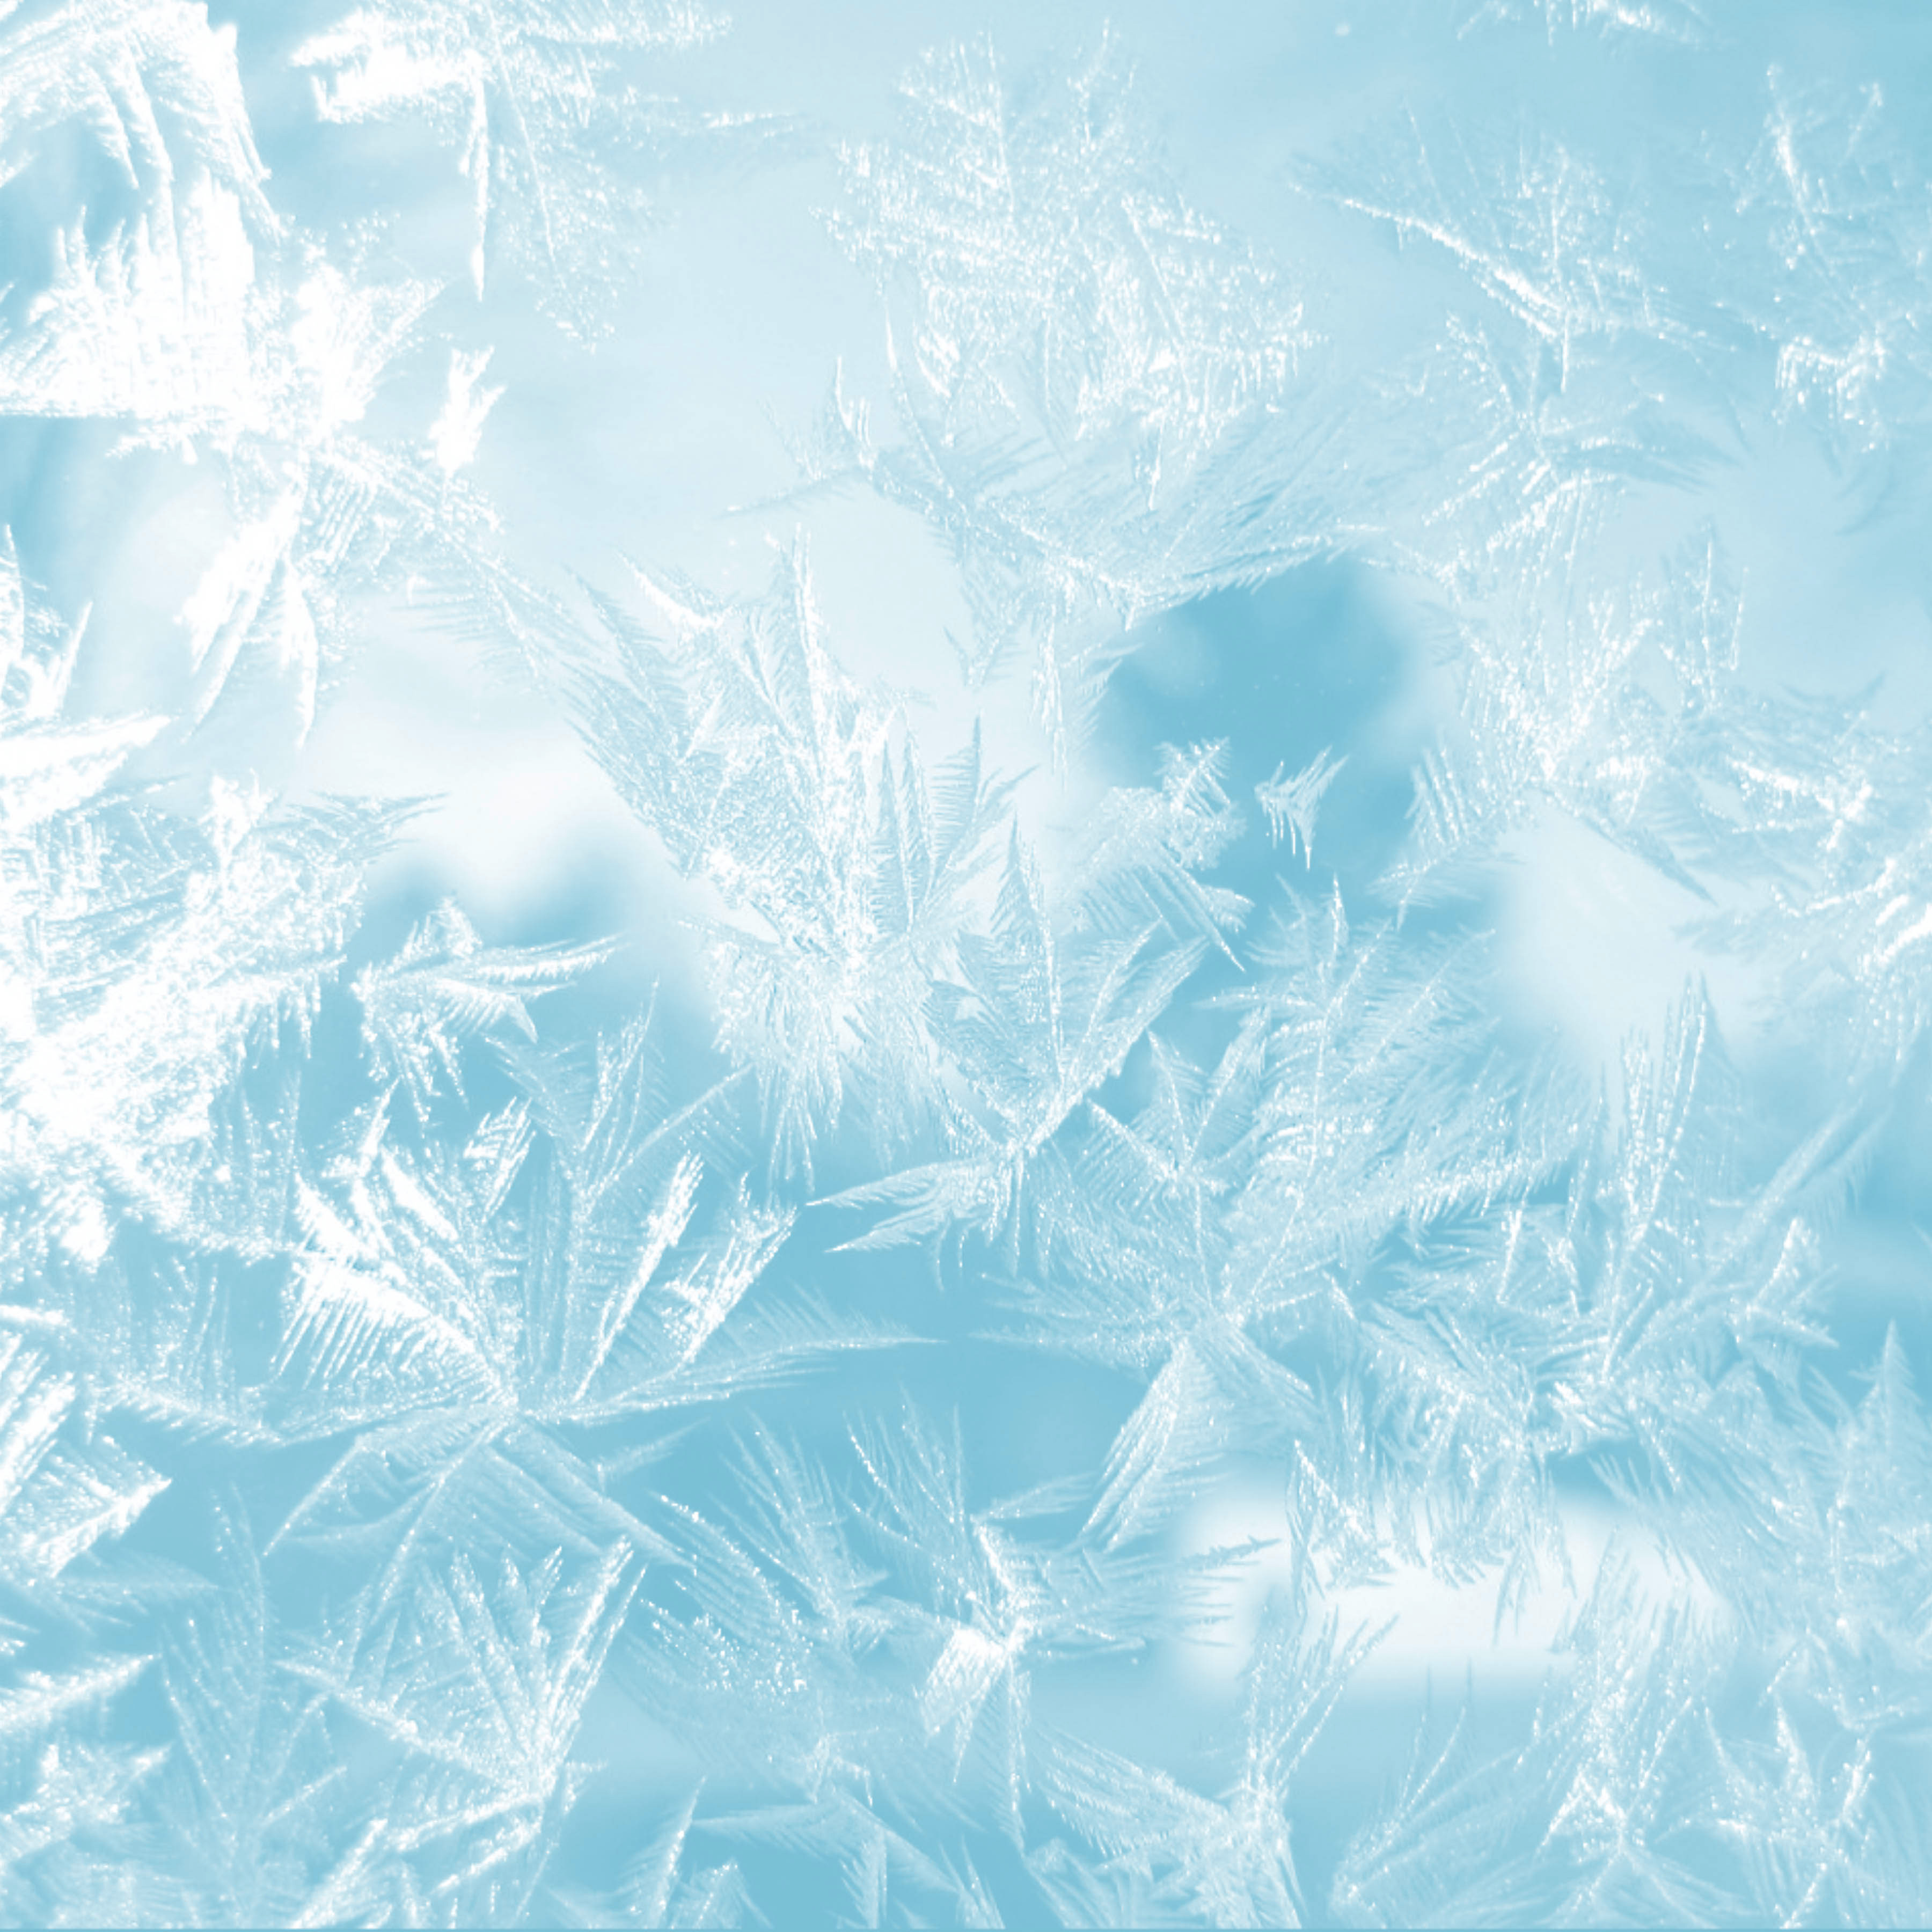 Icy Backgrounds